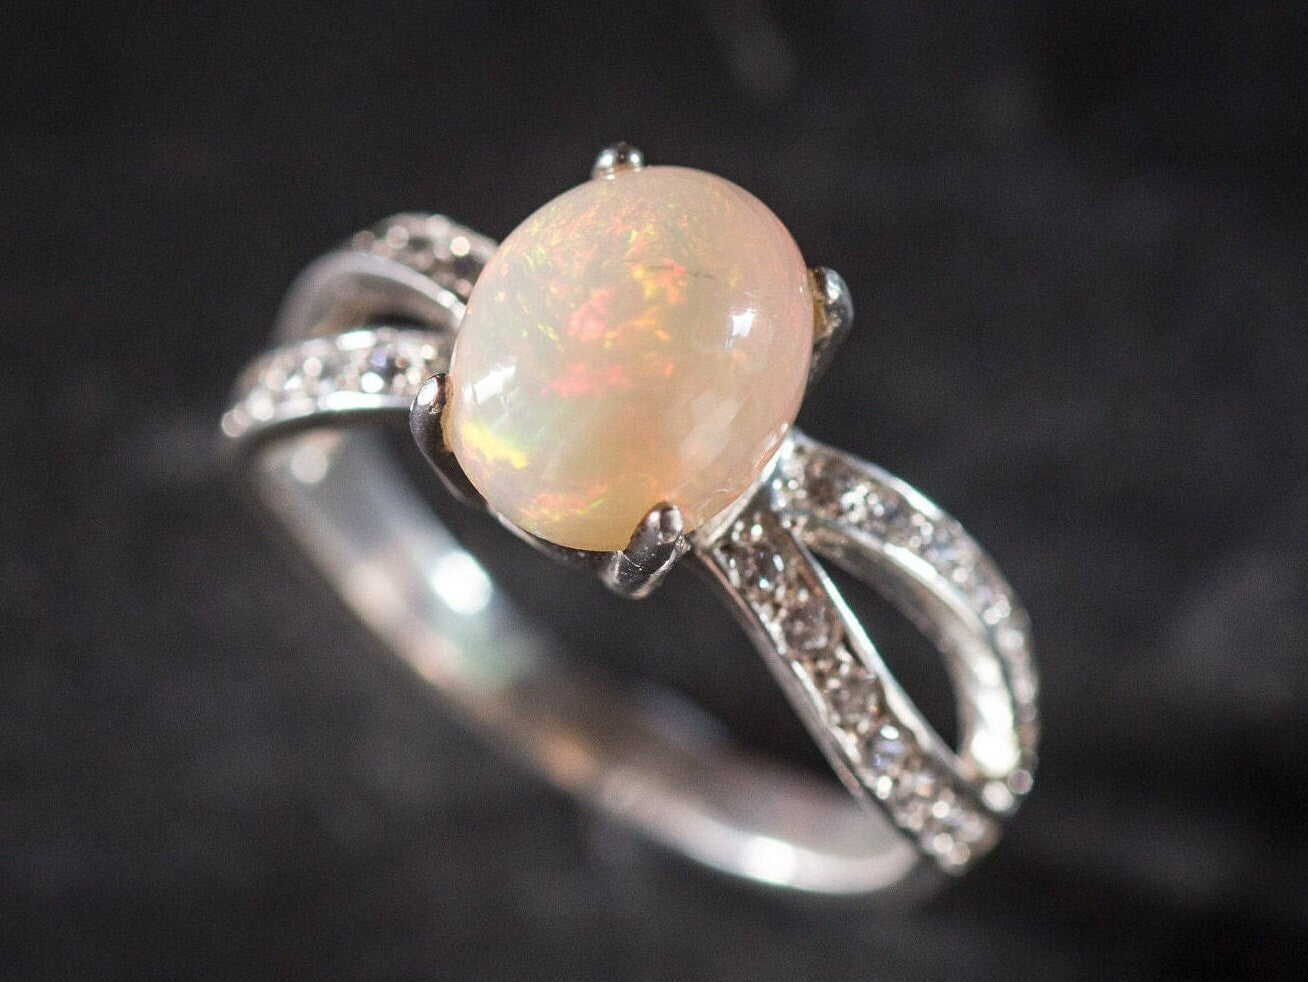 Engagement Opal Ring, Natural Opal, Ethiopian Opal, October Birthstone, Vintage Rings, Opal Ring, Solid Silver Ring, Rainbow Opal, Opal